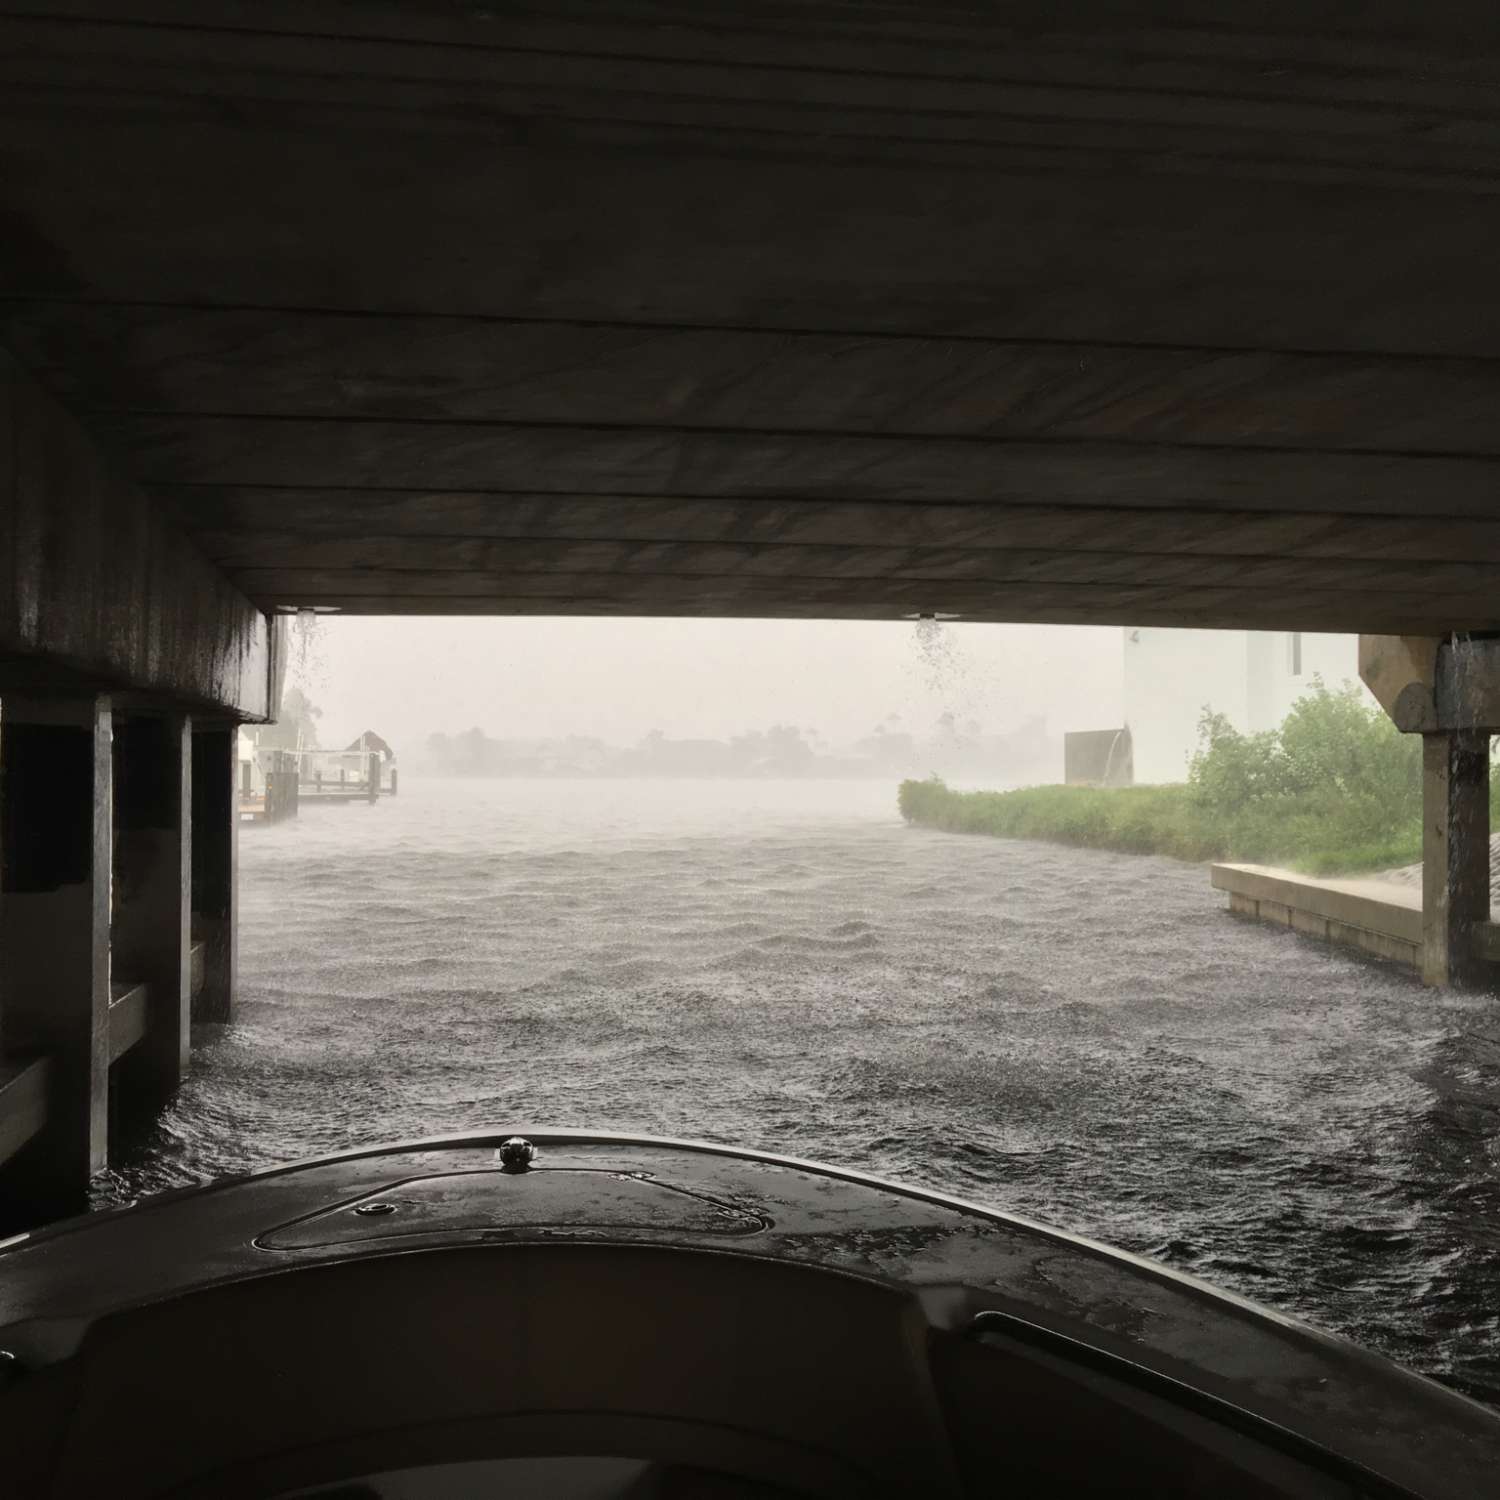 Cape Coral, Florida. Hiding under a overpass bridge during a downpour, not even 1 mile from home.